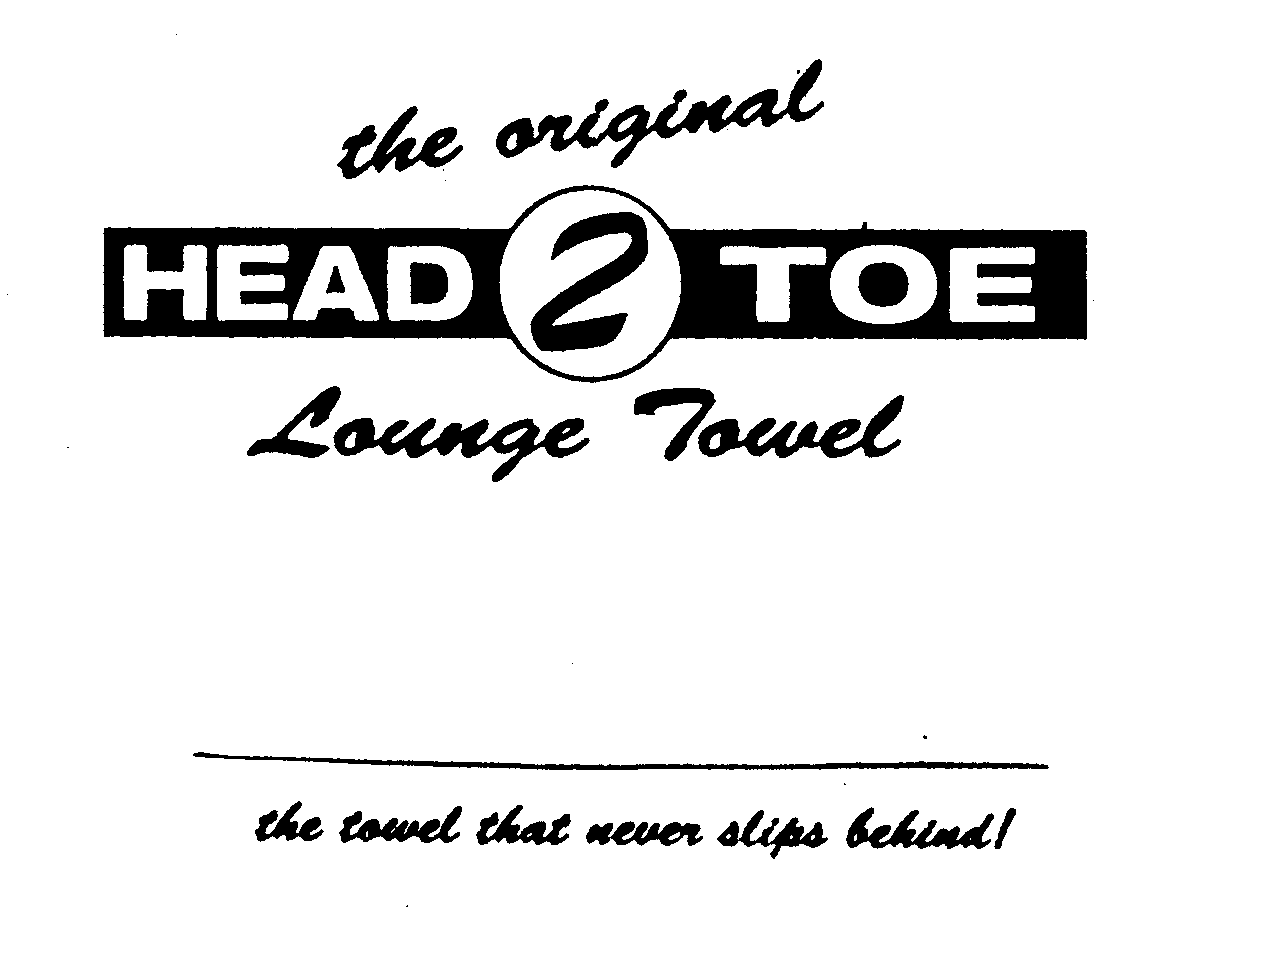  THE ORIGINAL HEAD 2 TOE LOUNGE TOWEL THE TOWEL THAT NEVER SLIPS BEHIND!